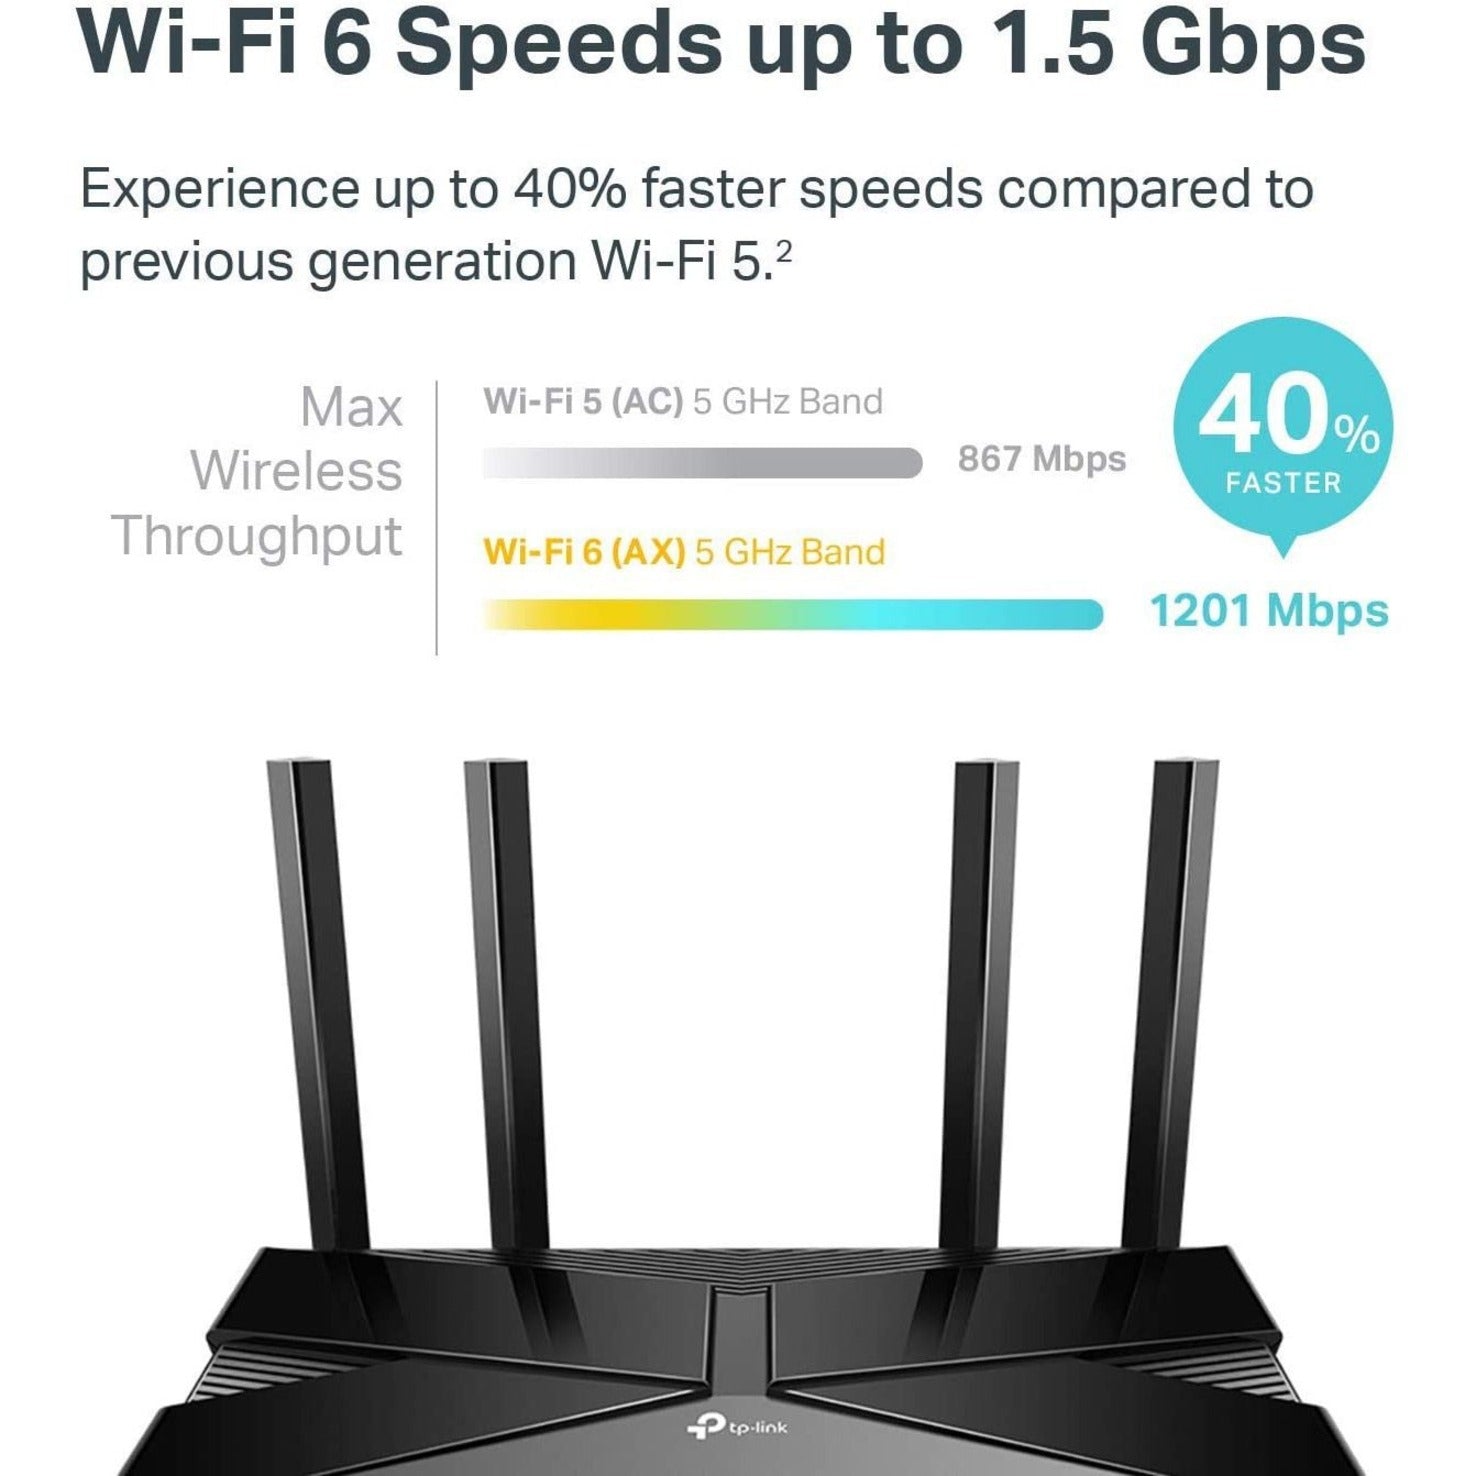 TP-Link ARCHER AX10 AX1500 Wi-Fi 6 Router, Dual Band Gigabit Ethernet Wireless Router